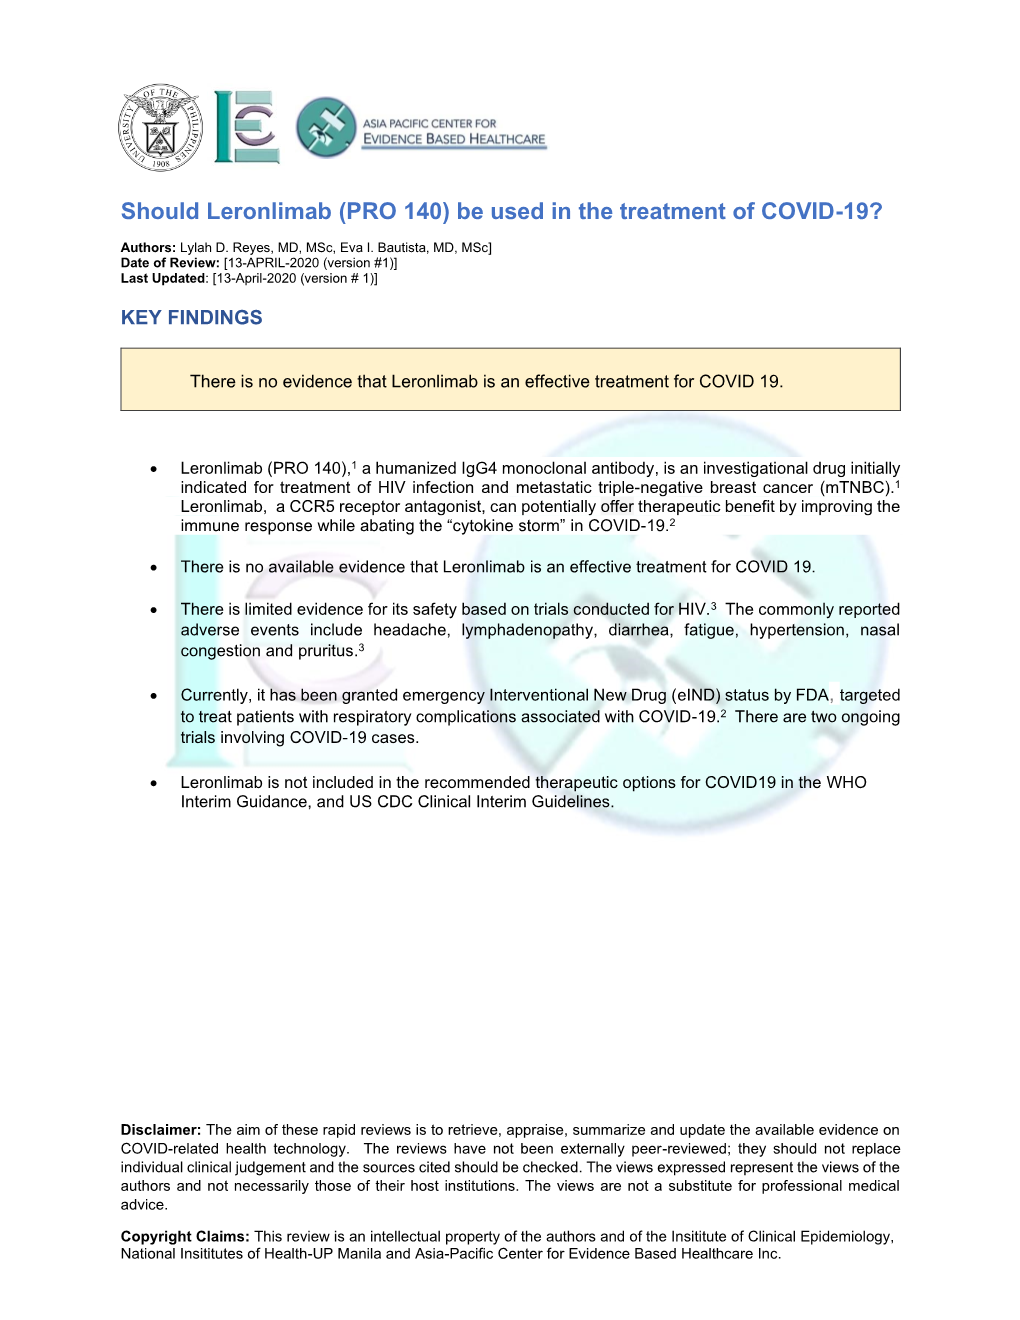 Should Leronlimab (PRO 140) Be Used in the Treatment of COVID-19?